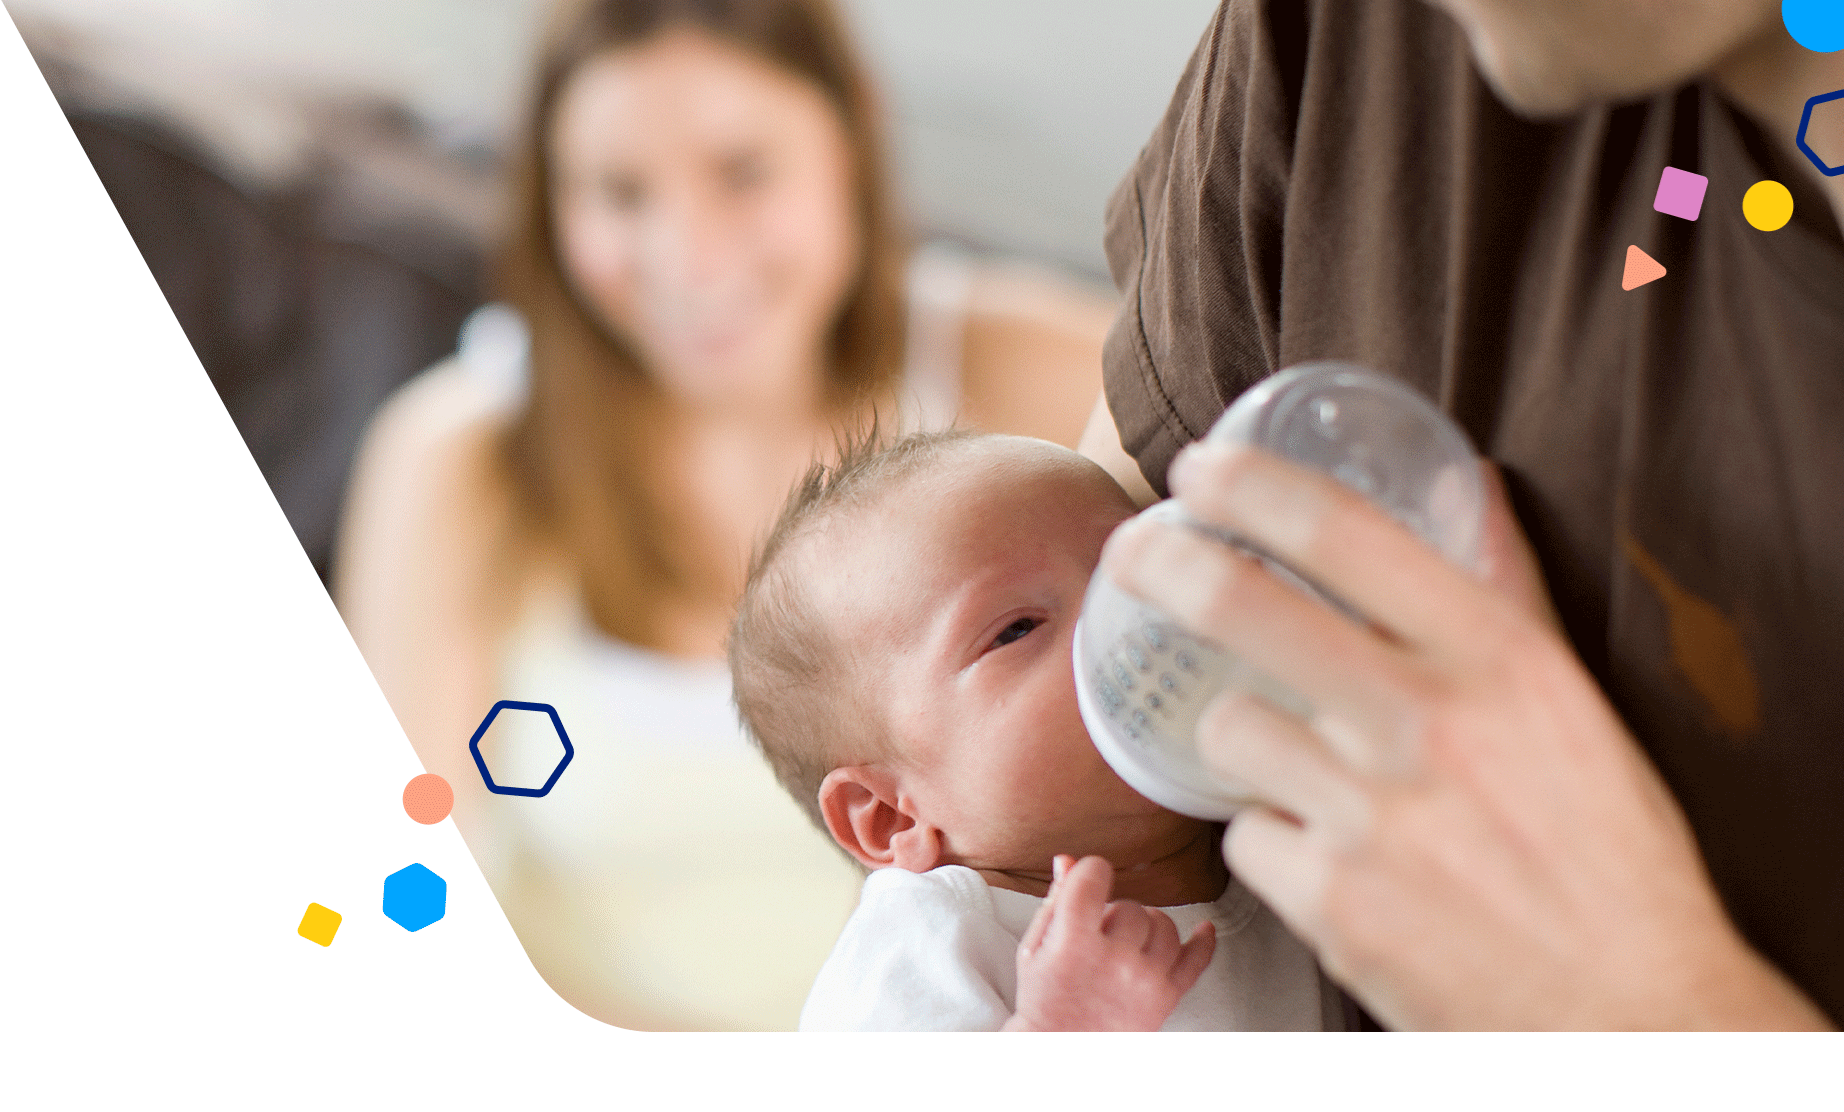 When To Stop Bottle Feeding The Babies And How To Do It?